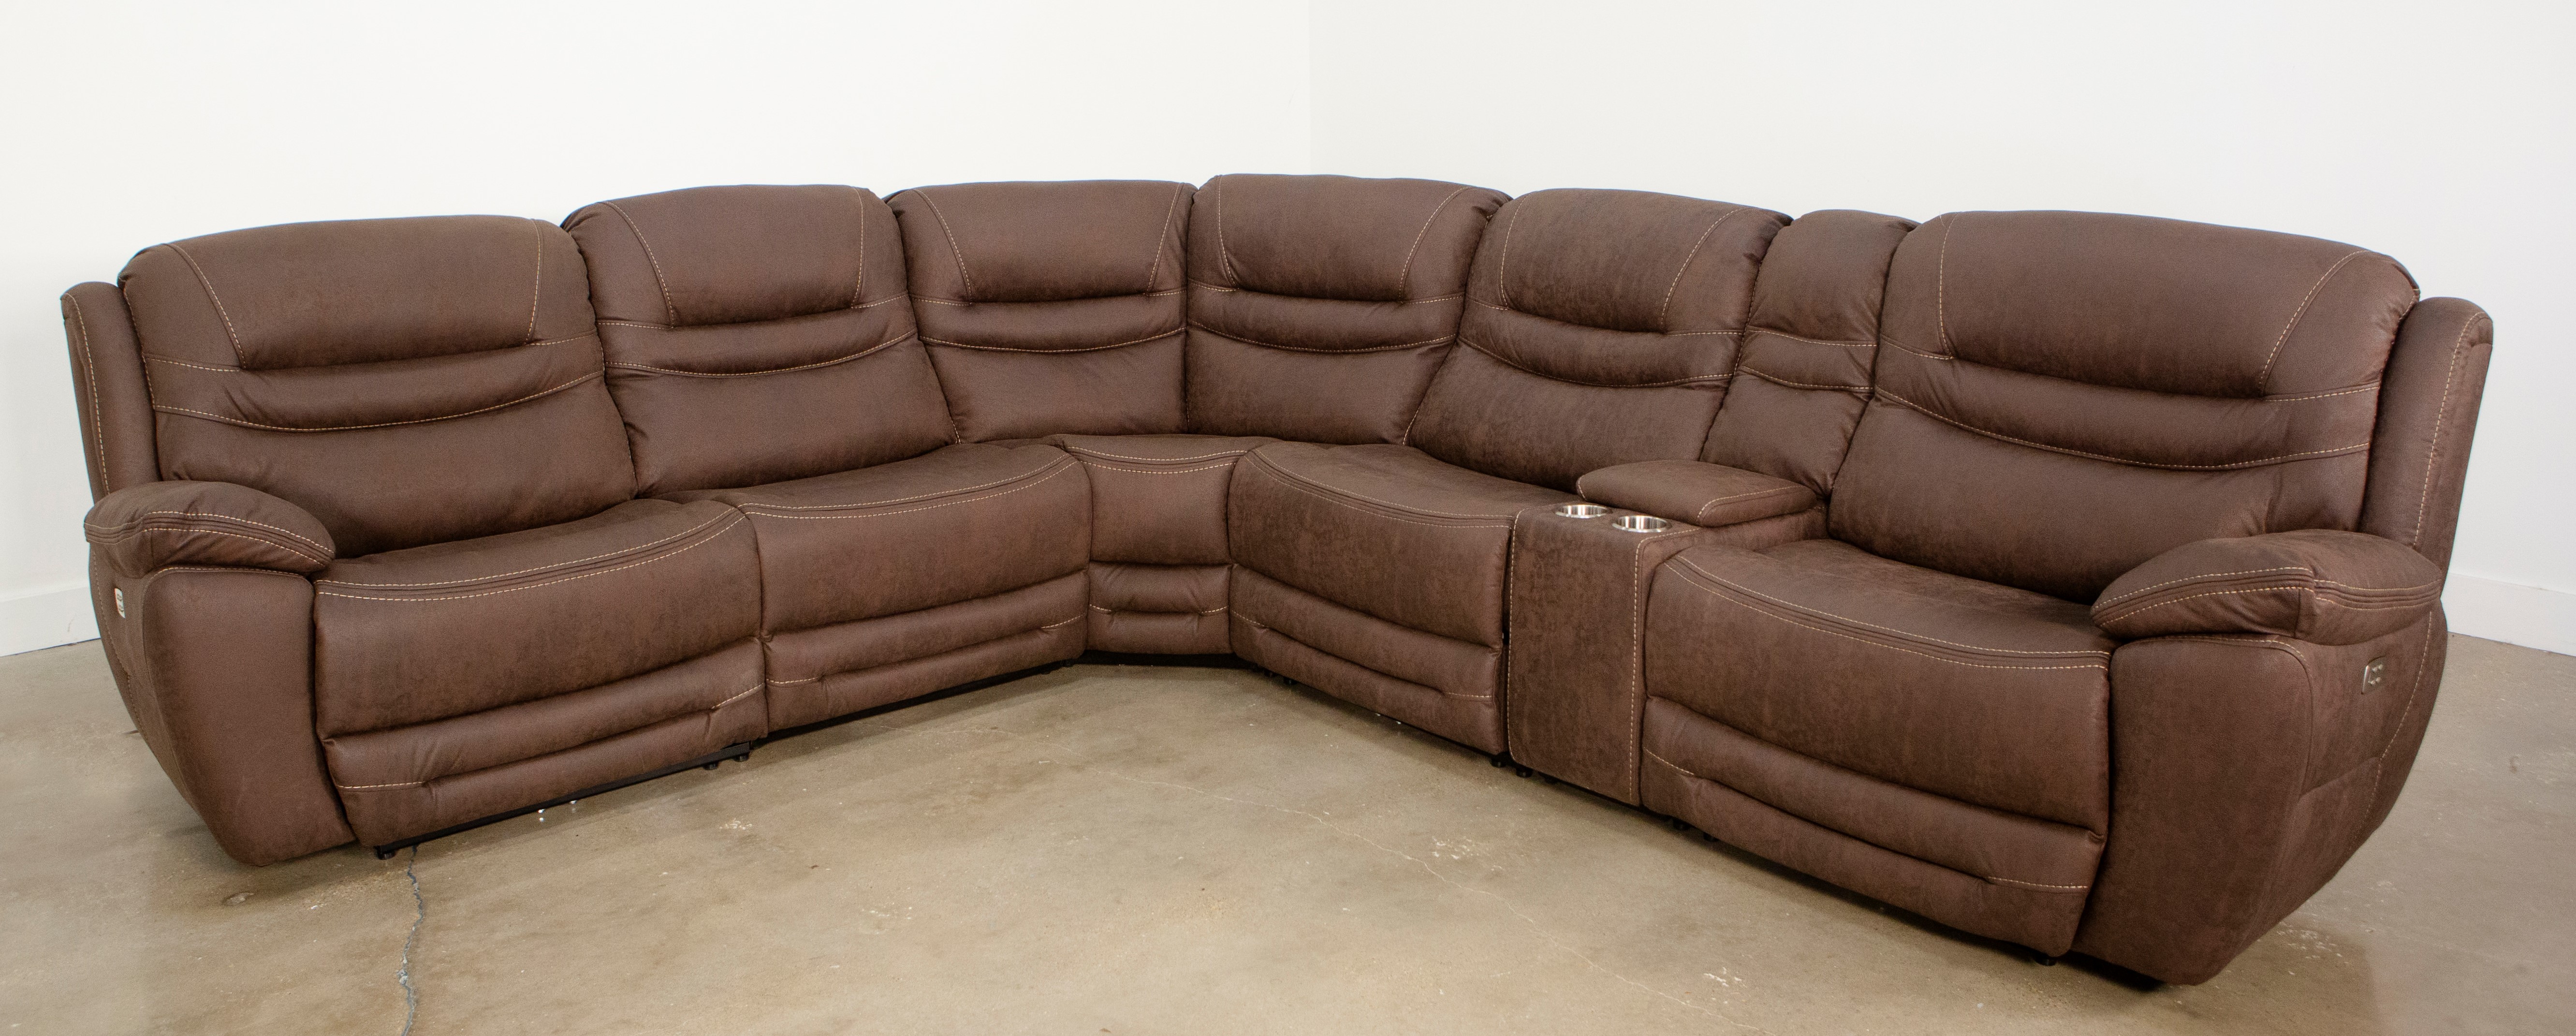 Kuka Home K-Motion 6 Piece Brown Power Reclining Sectional